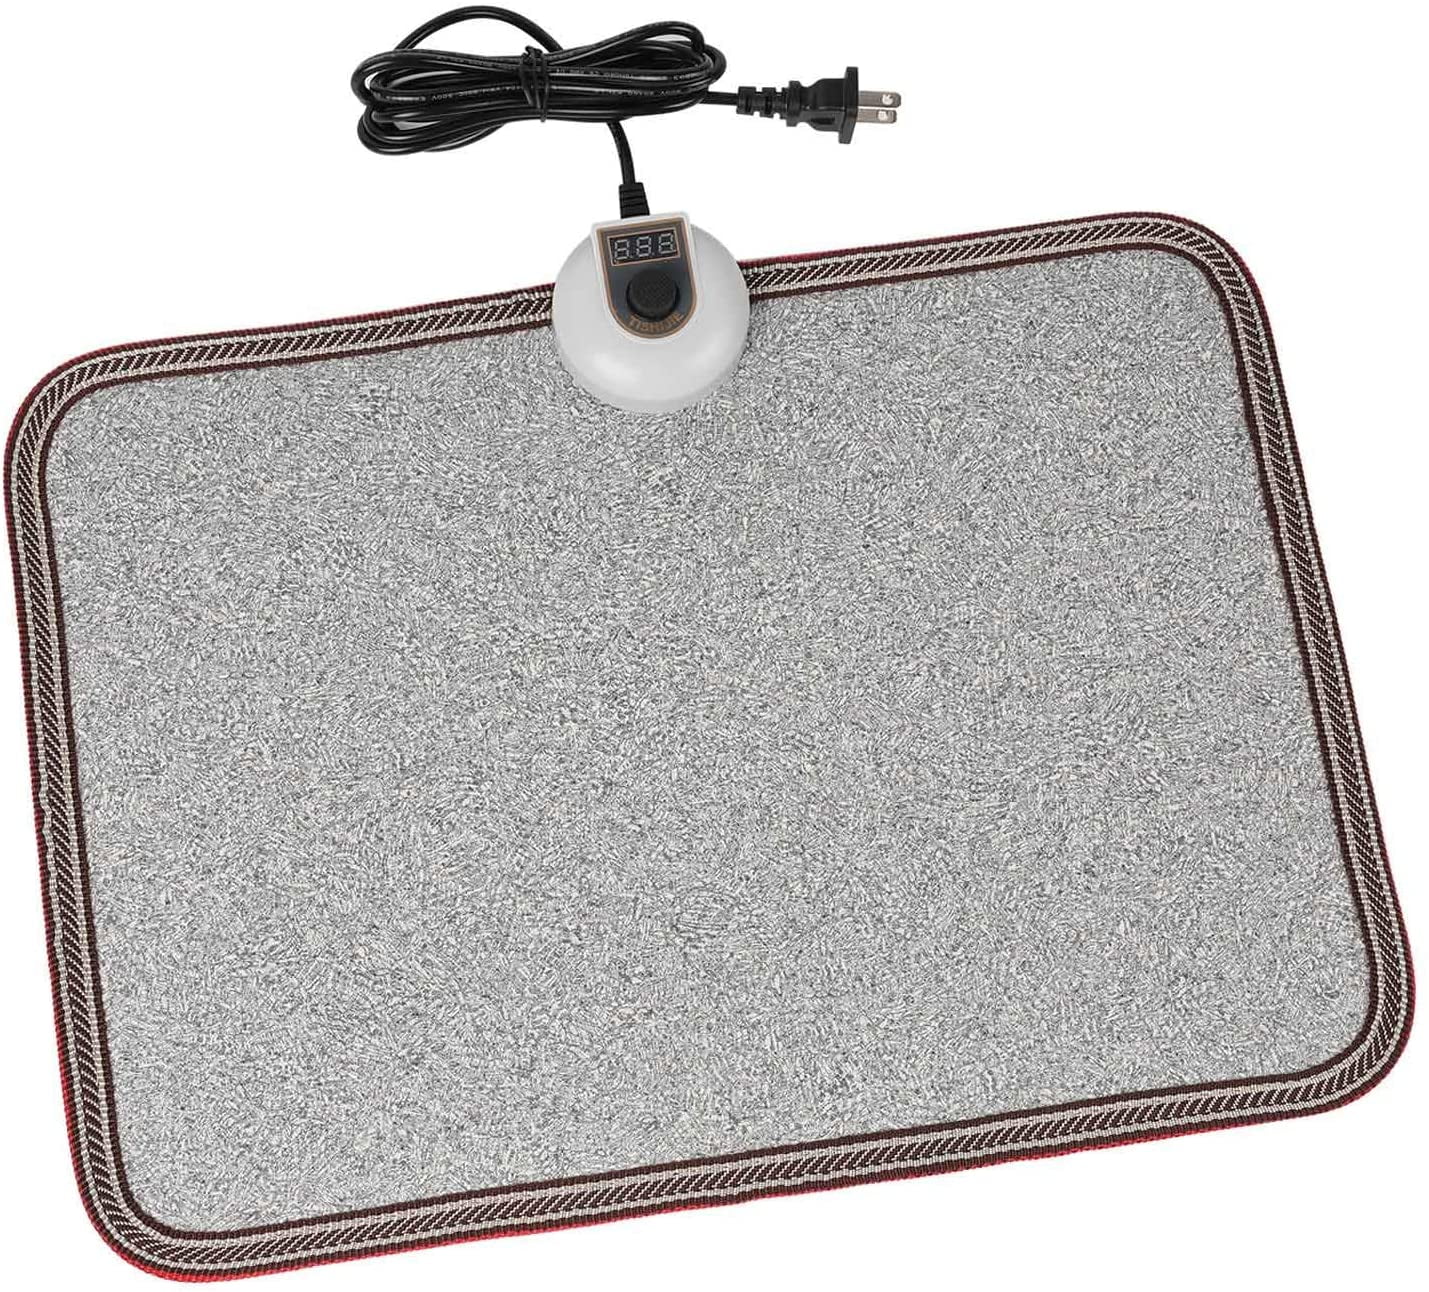 Hodeamy Heated Floor Mat Under Desk for Foot Warmer - Wider 110V Adjustable  Temperature Electric Heating Pad - Carbon Crystal & Energy Saving Feet  Warmers for office,home (Black Gray) 